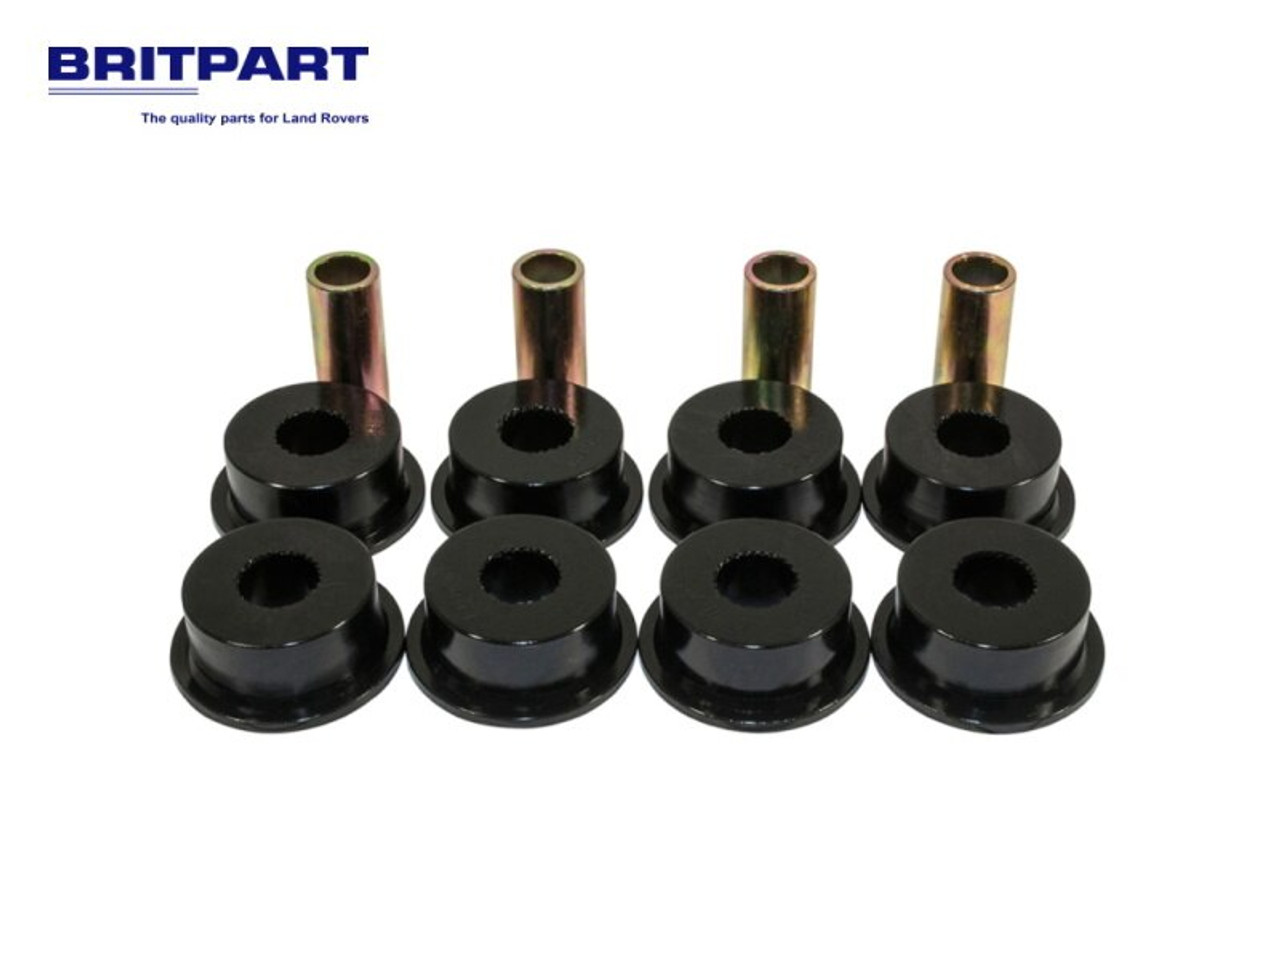 Britpart Polyurethane Front Radius Arm To Axle Bushes For Discovery 1 and RRC - NTC6860PY